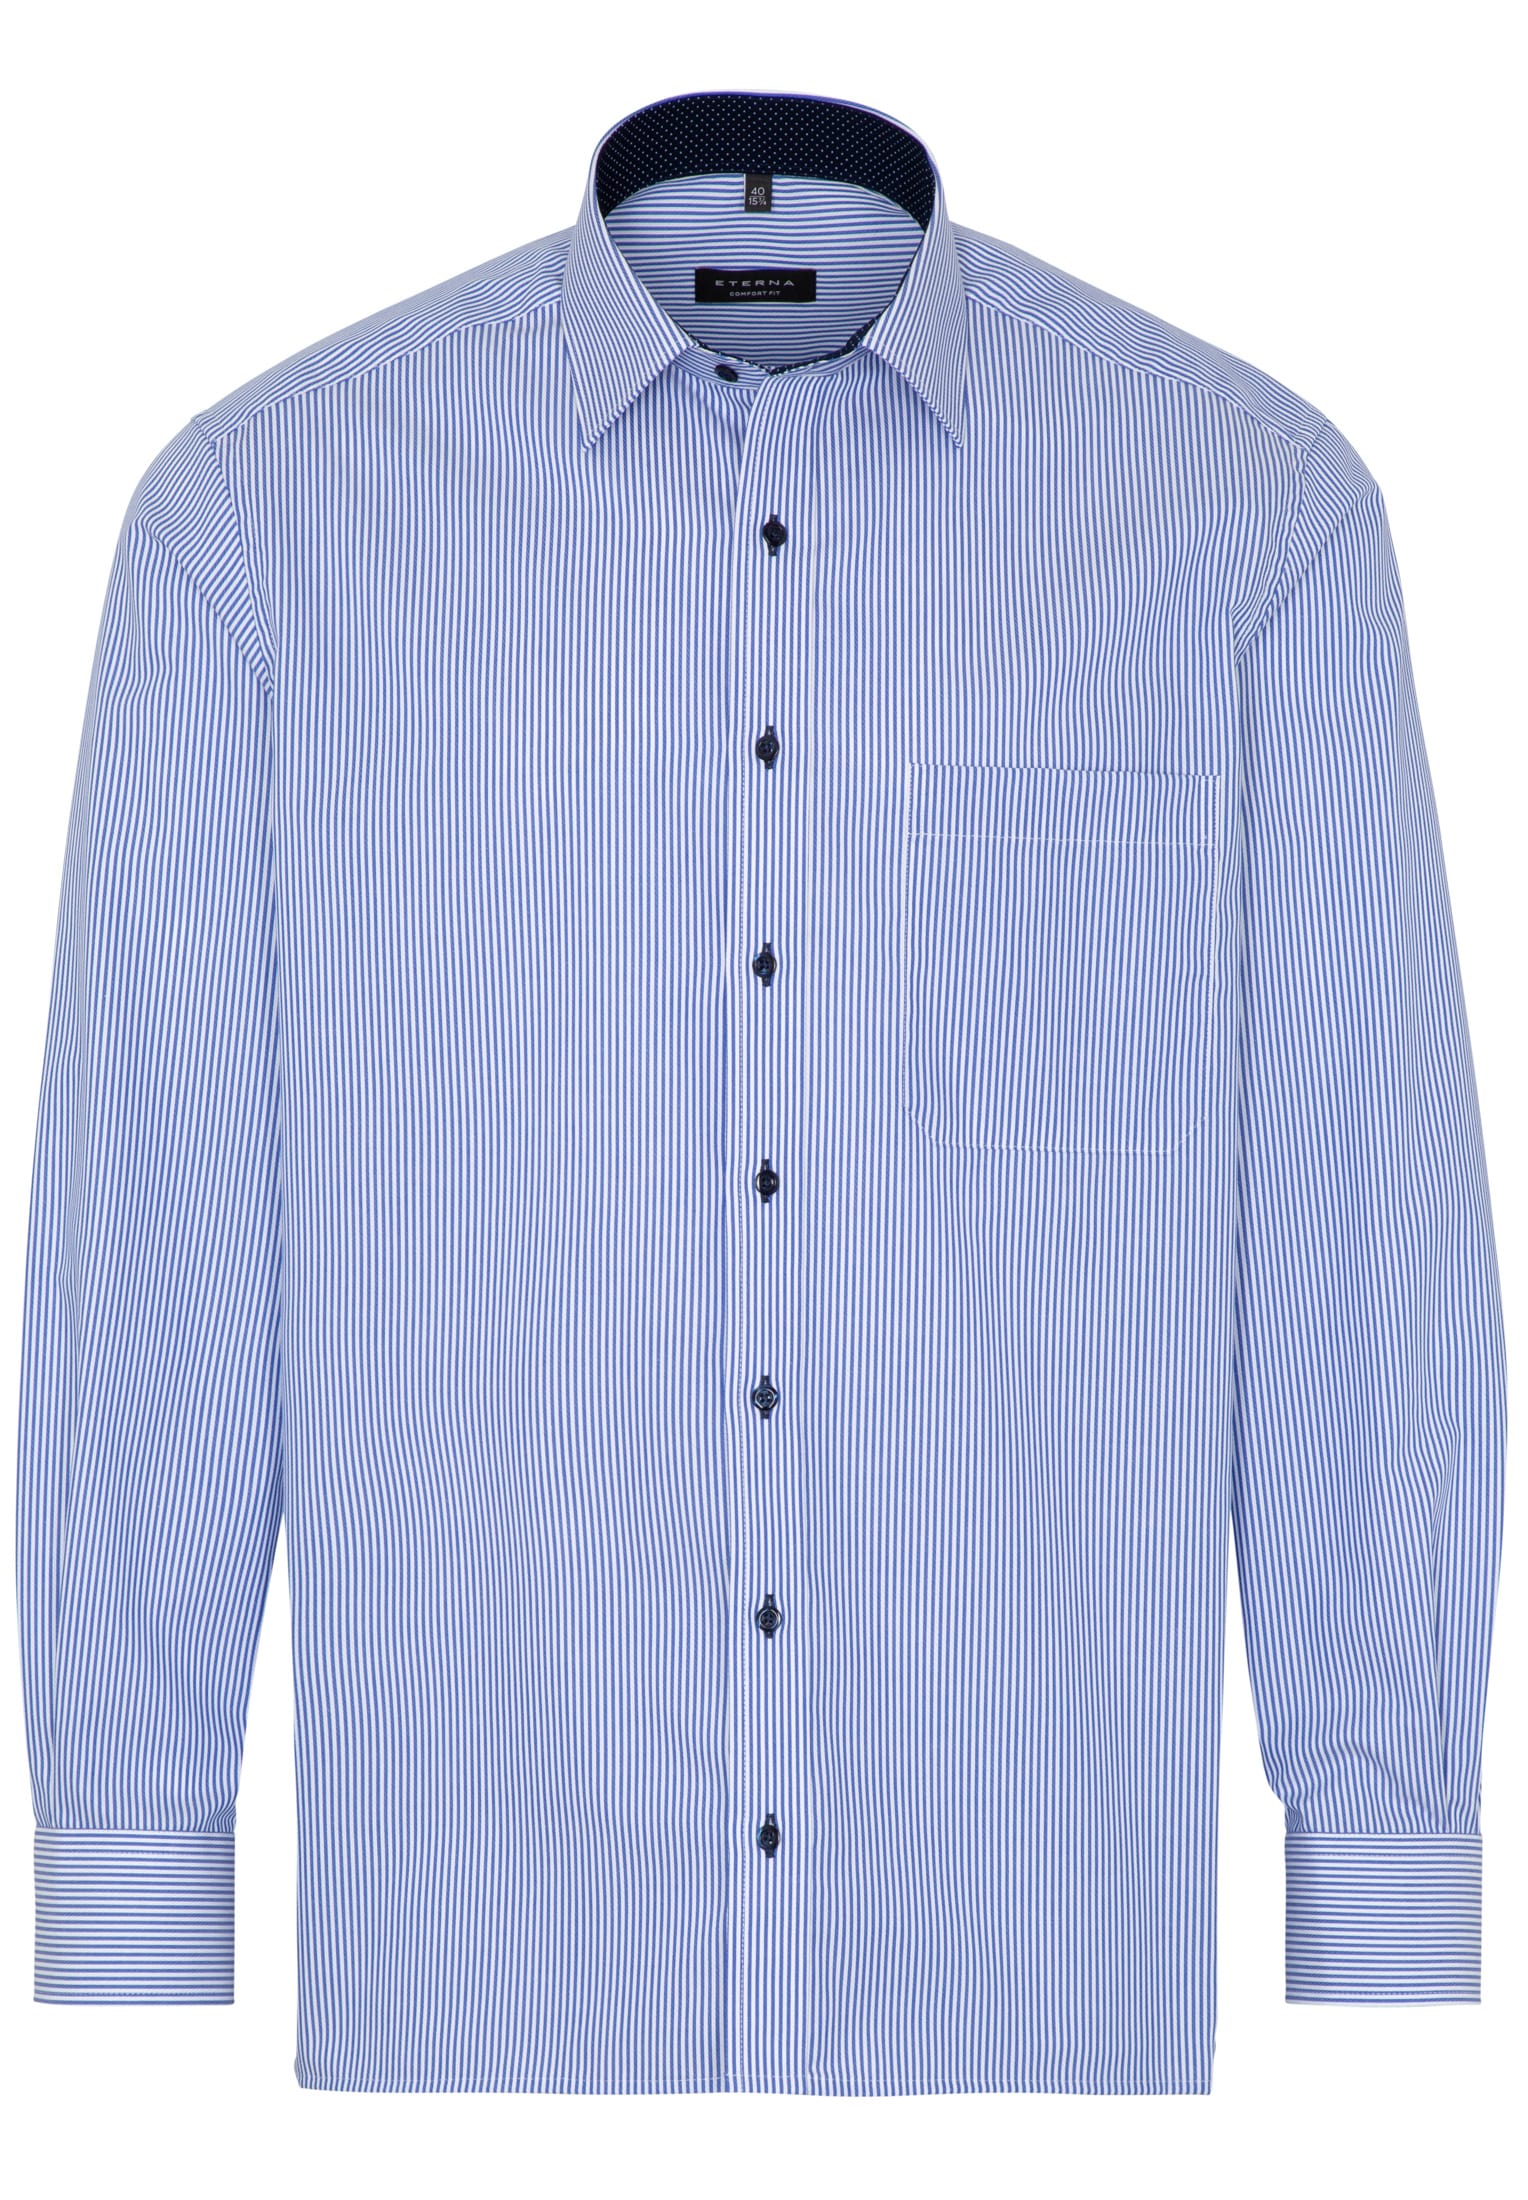 COMFORT FIT Shirt in blue striped